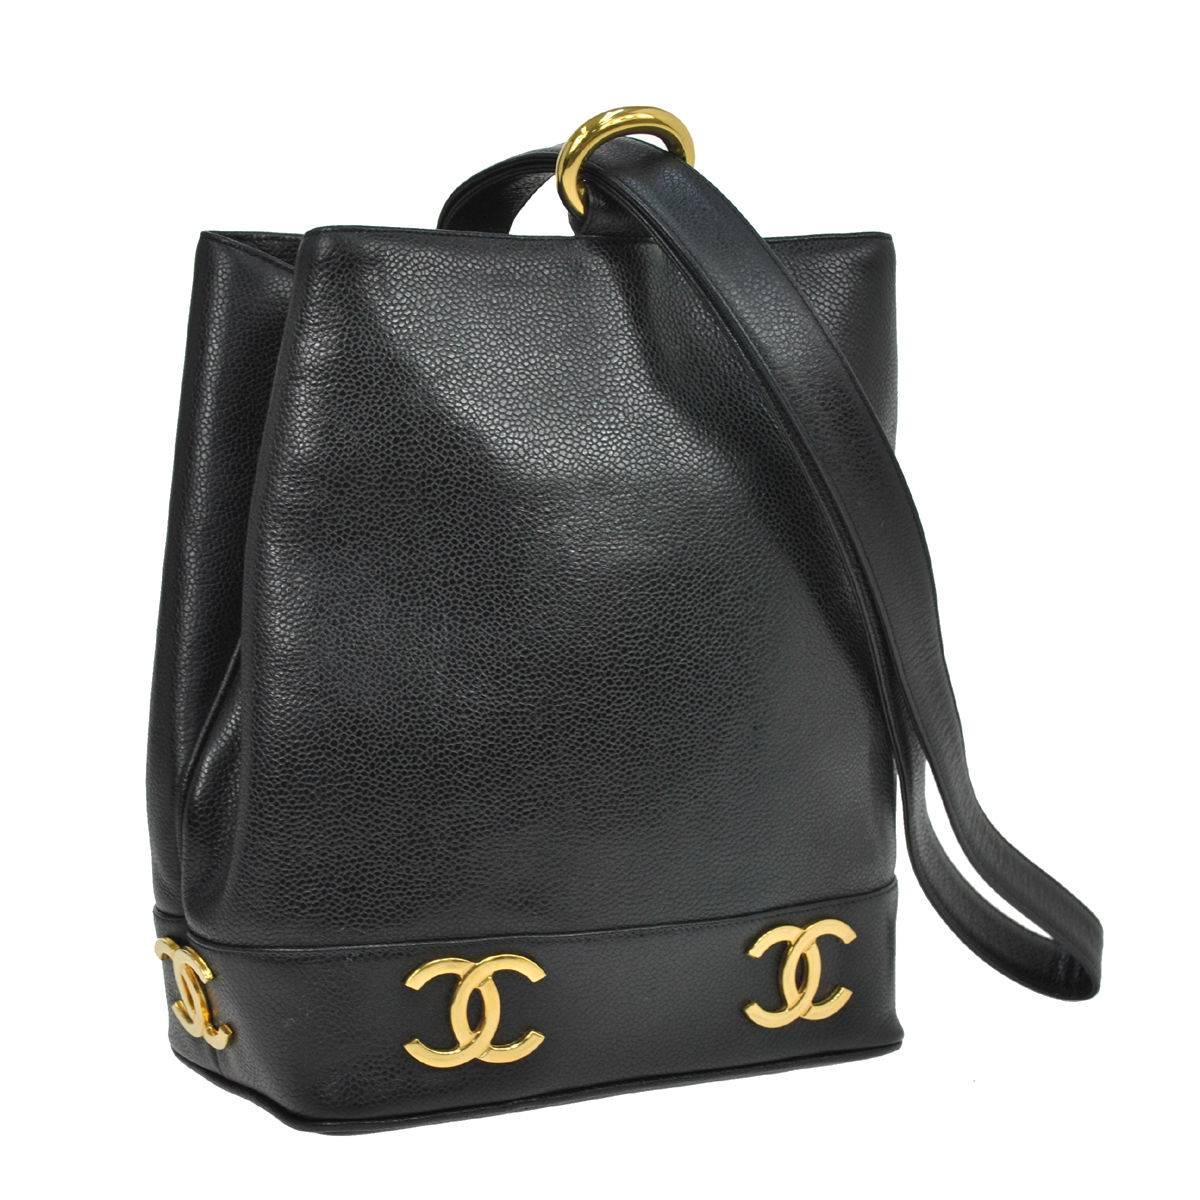 Chanel Black Leather Gold Charms Sling Back Carryall Duffle Shoulder Bag

Caviar leather
Gold tone hardware
Date code present 
Made in Italy
Shoulder strap drop 18